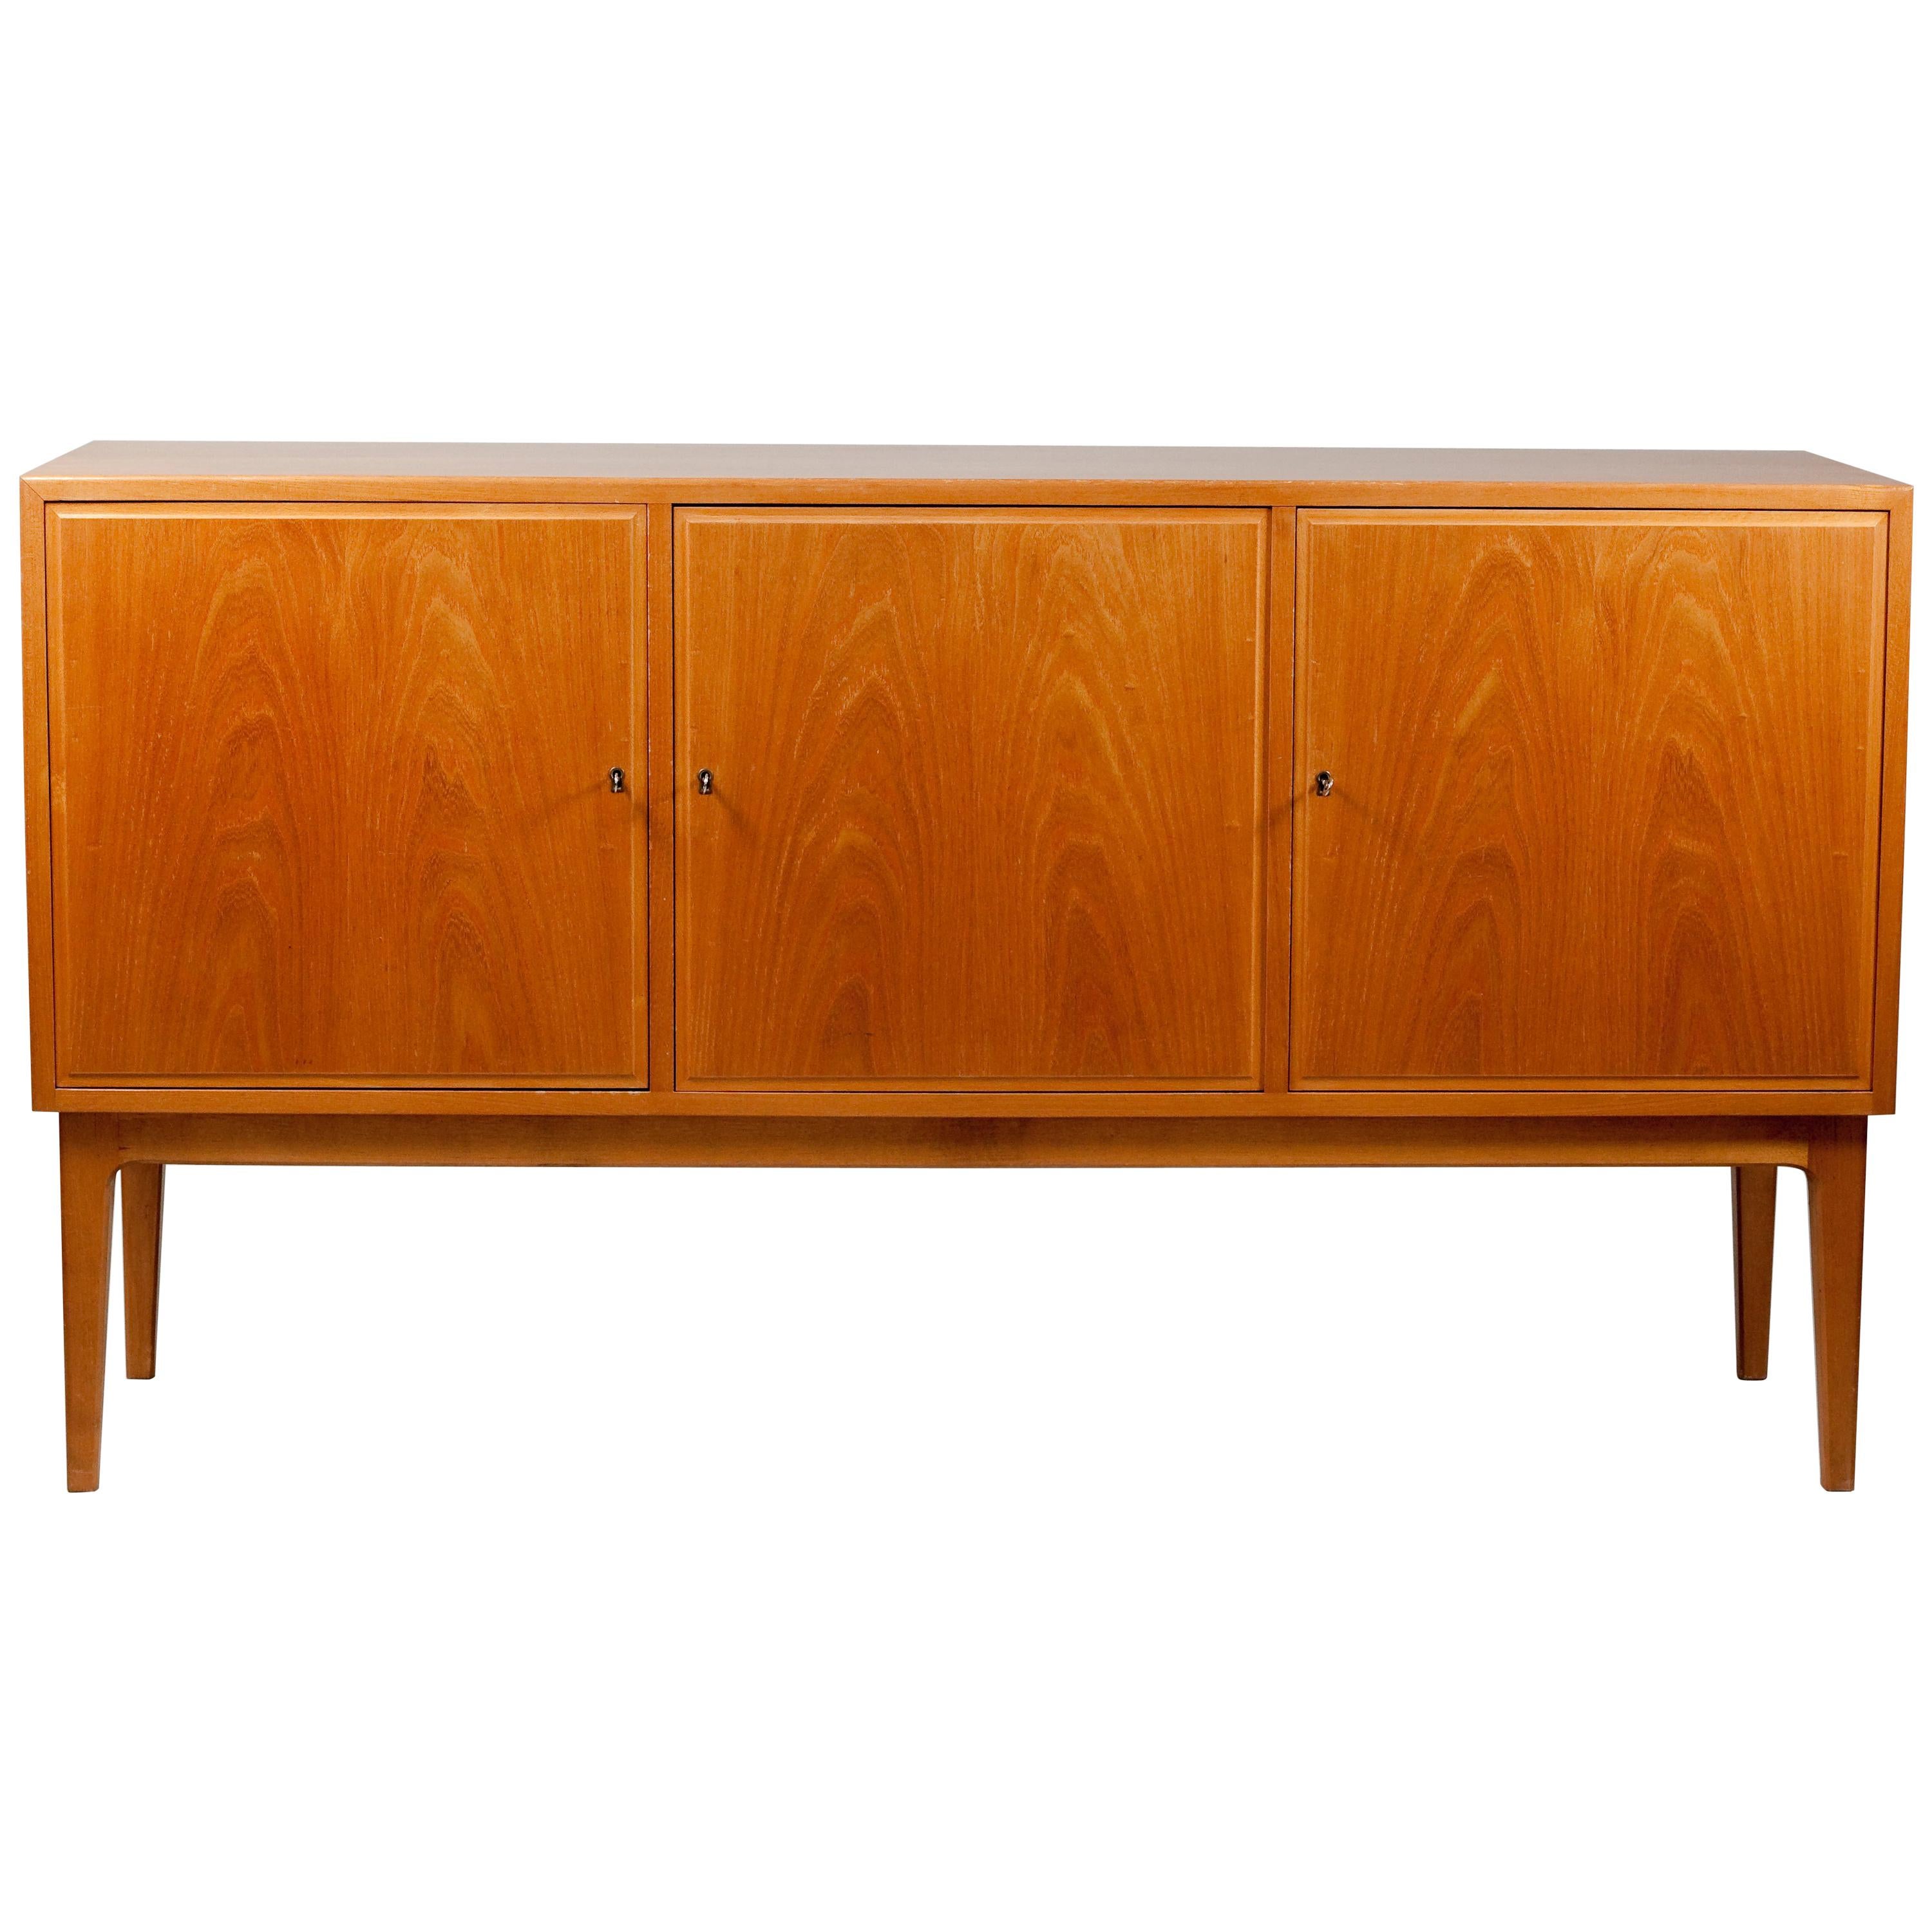 Large Finnish Mid-Century Modern Sideboard, 1950s For Sale